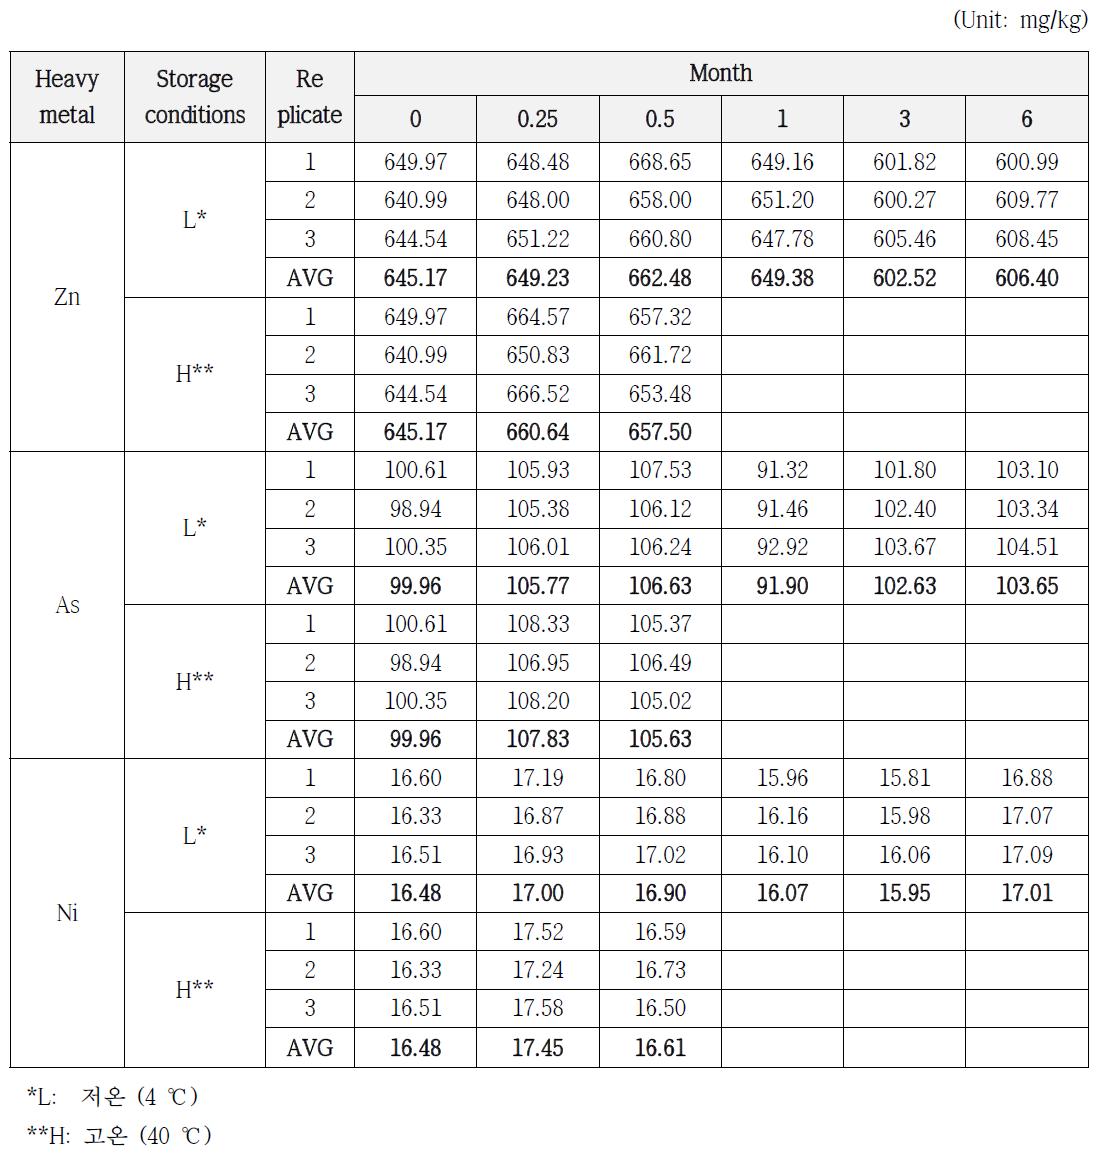 Result of stability study for Zinc, Arsenic and Nickel in soil PTMs of Metal-Ⅱ